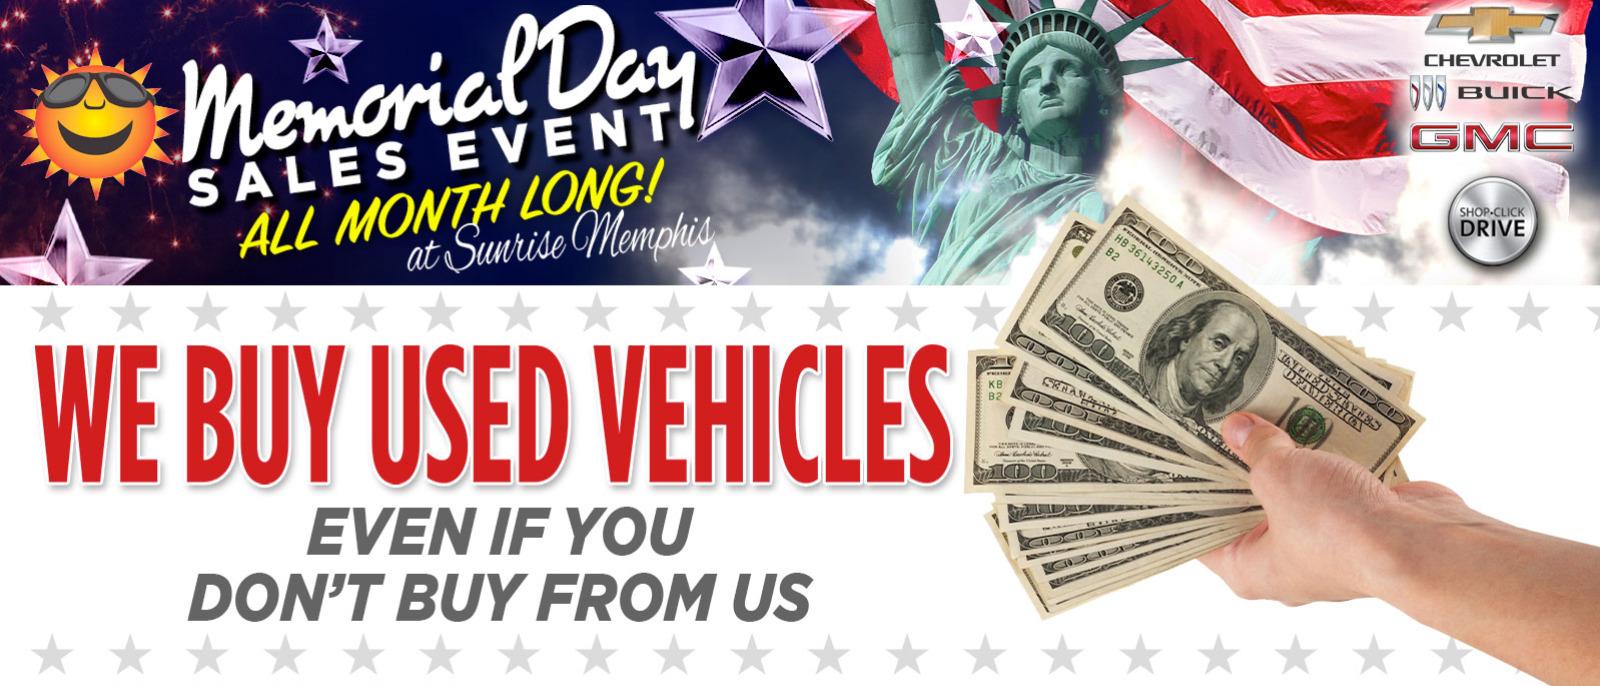 WE BUY USED VEHICLES - Even if you don't buy from us!